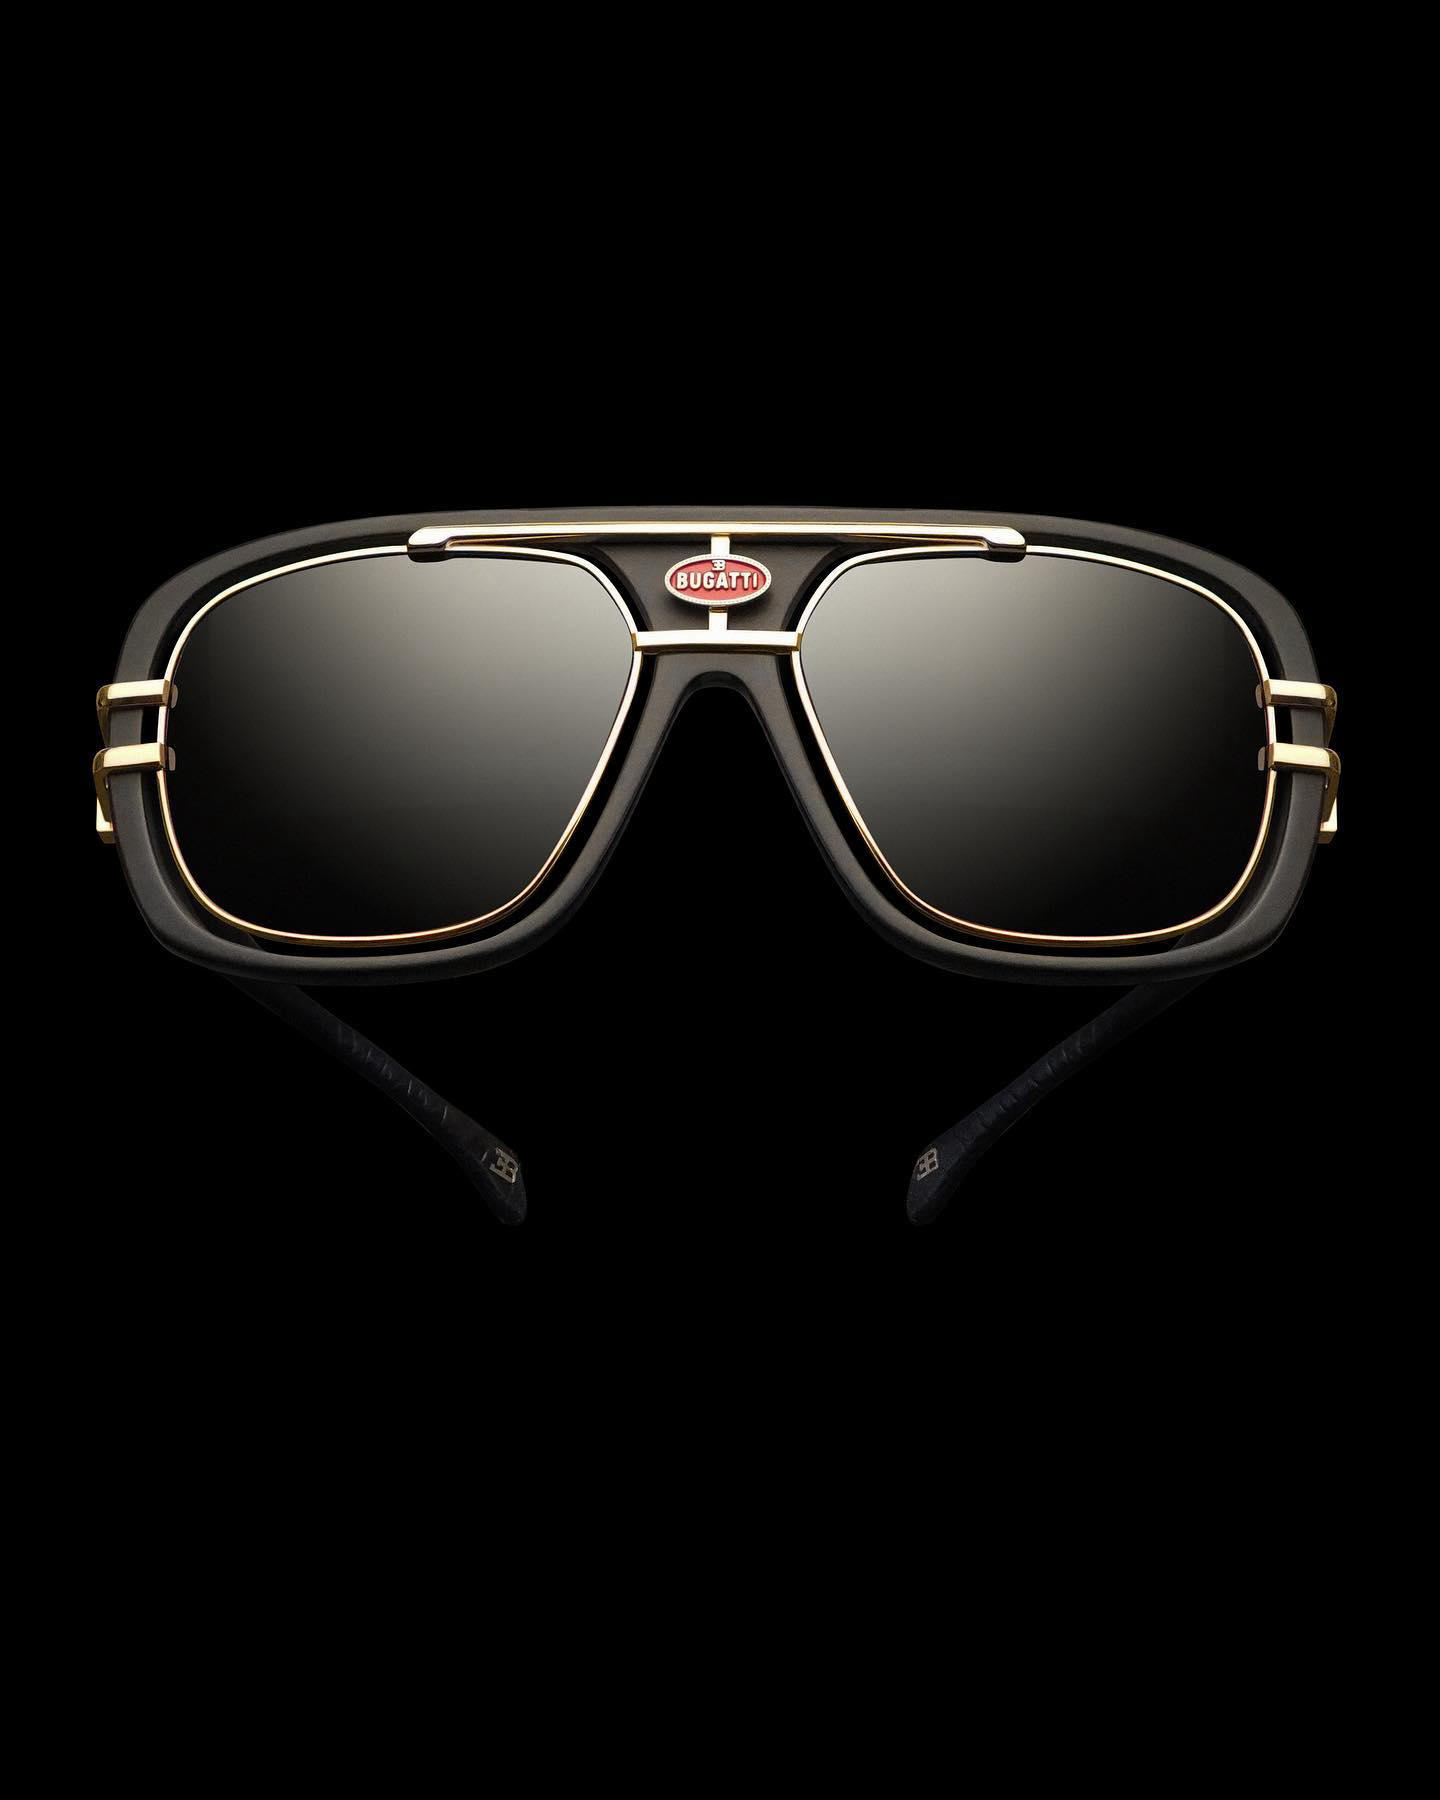 BUGATTI is expanding its luxury portfolio with the refined eyewear “Collection One”